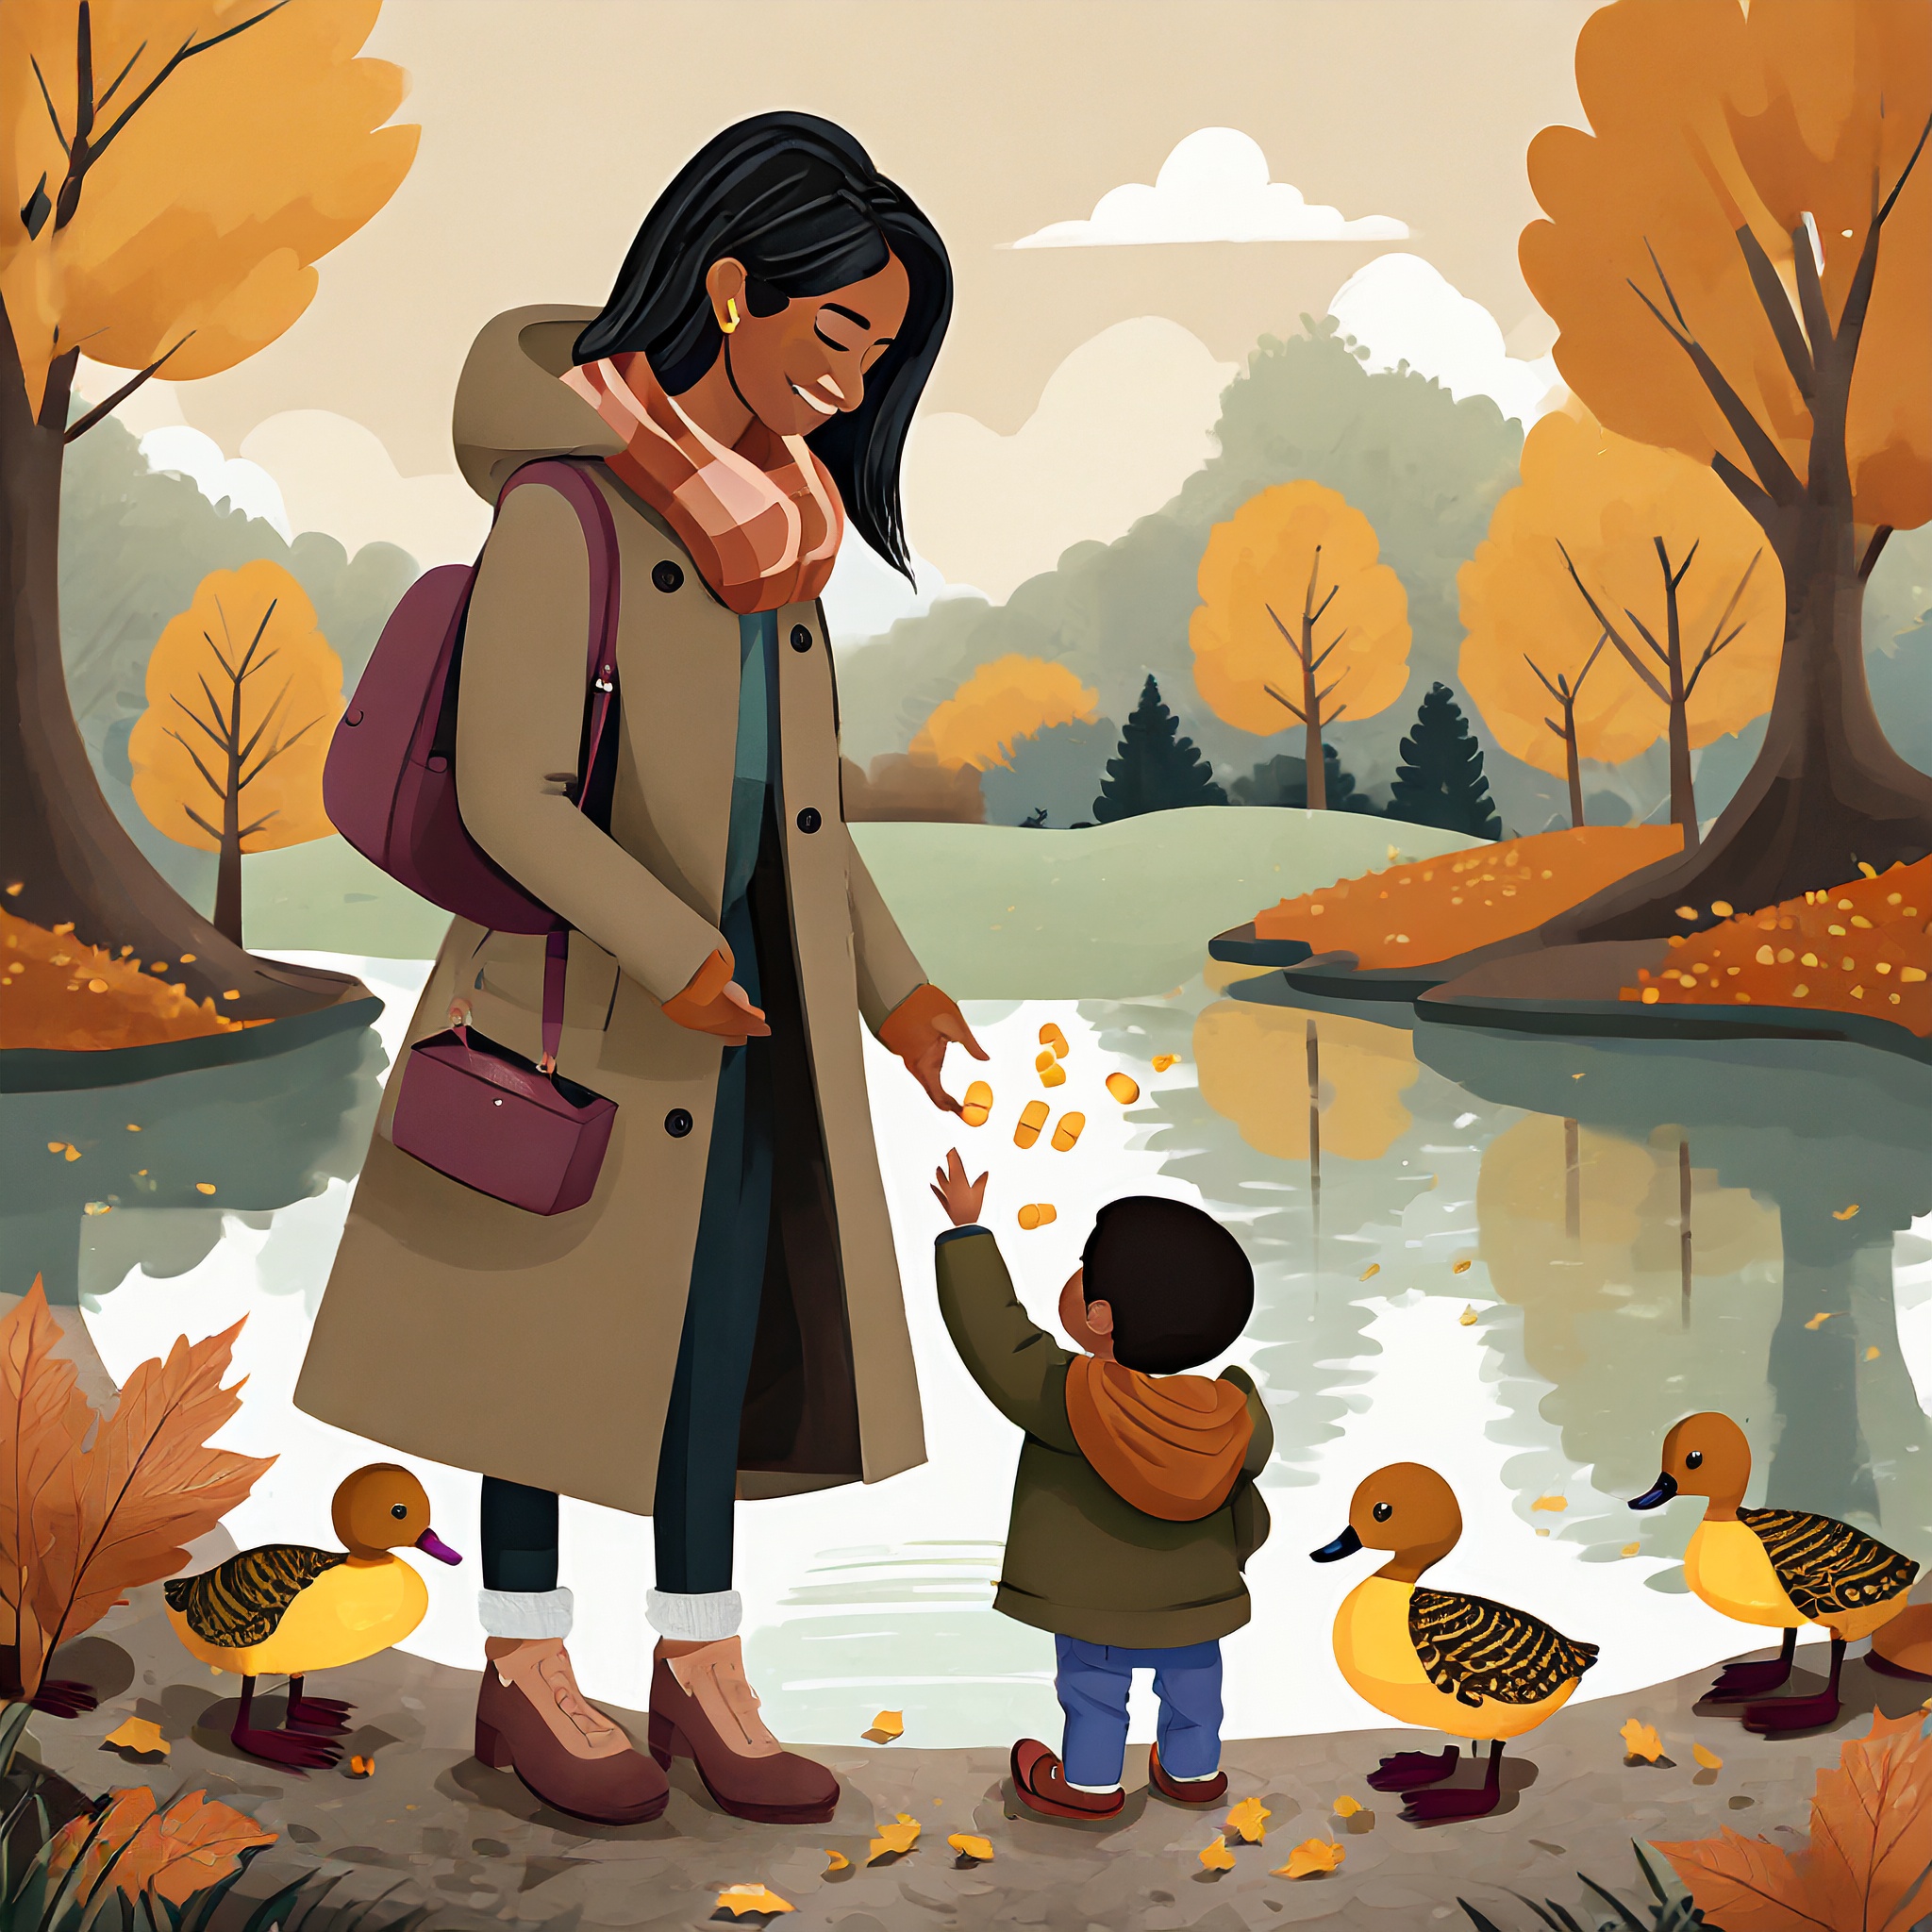 woman walking with small child in a park feeding ducks